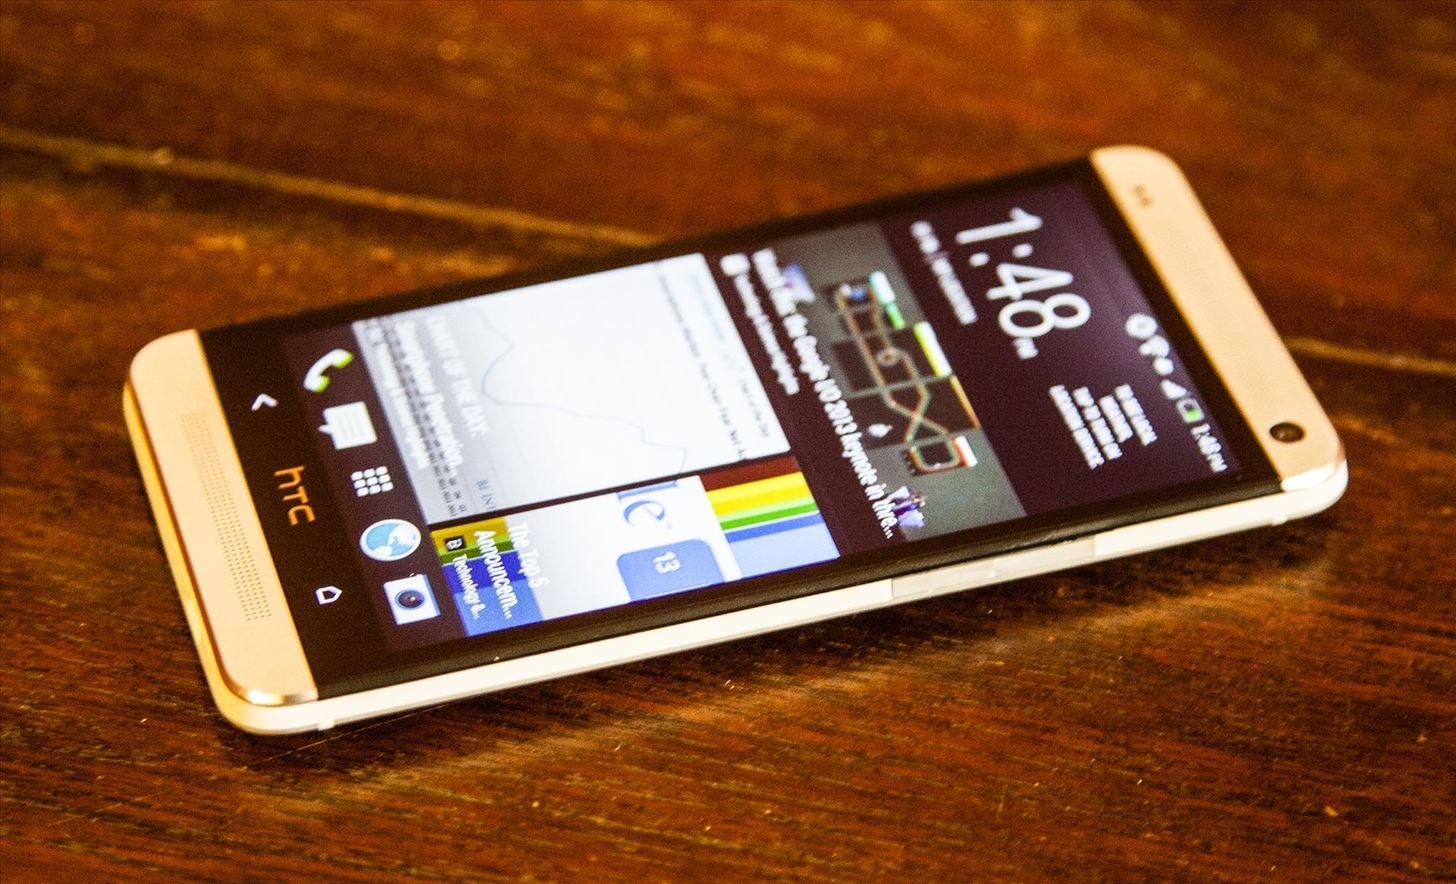 How to Remove Blinkfeed from Your HTC One for a Stock Feel Without Rooting